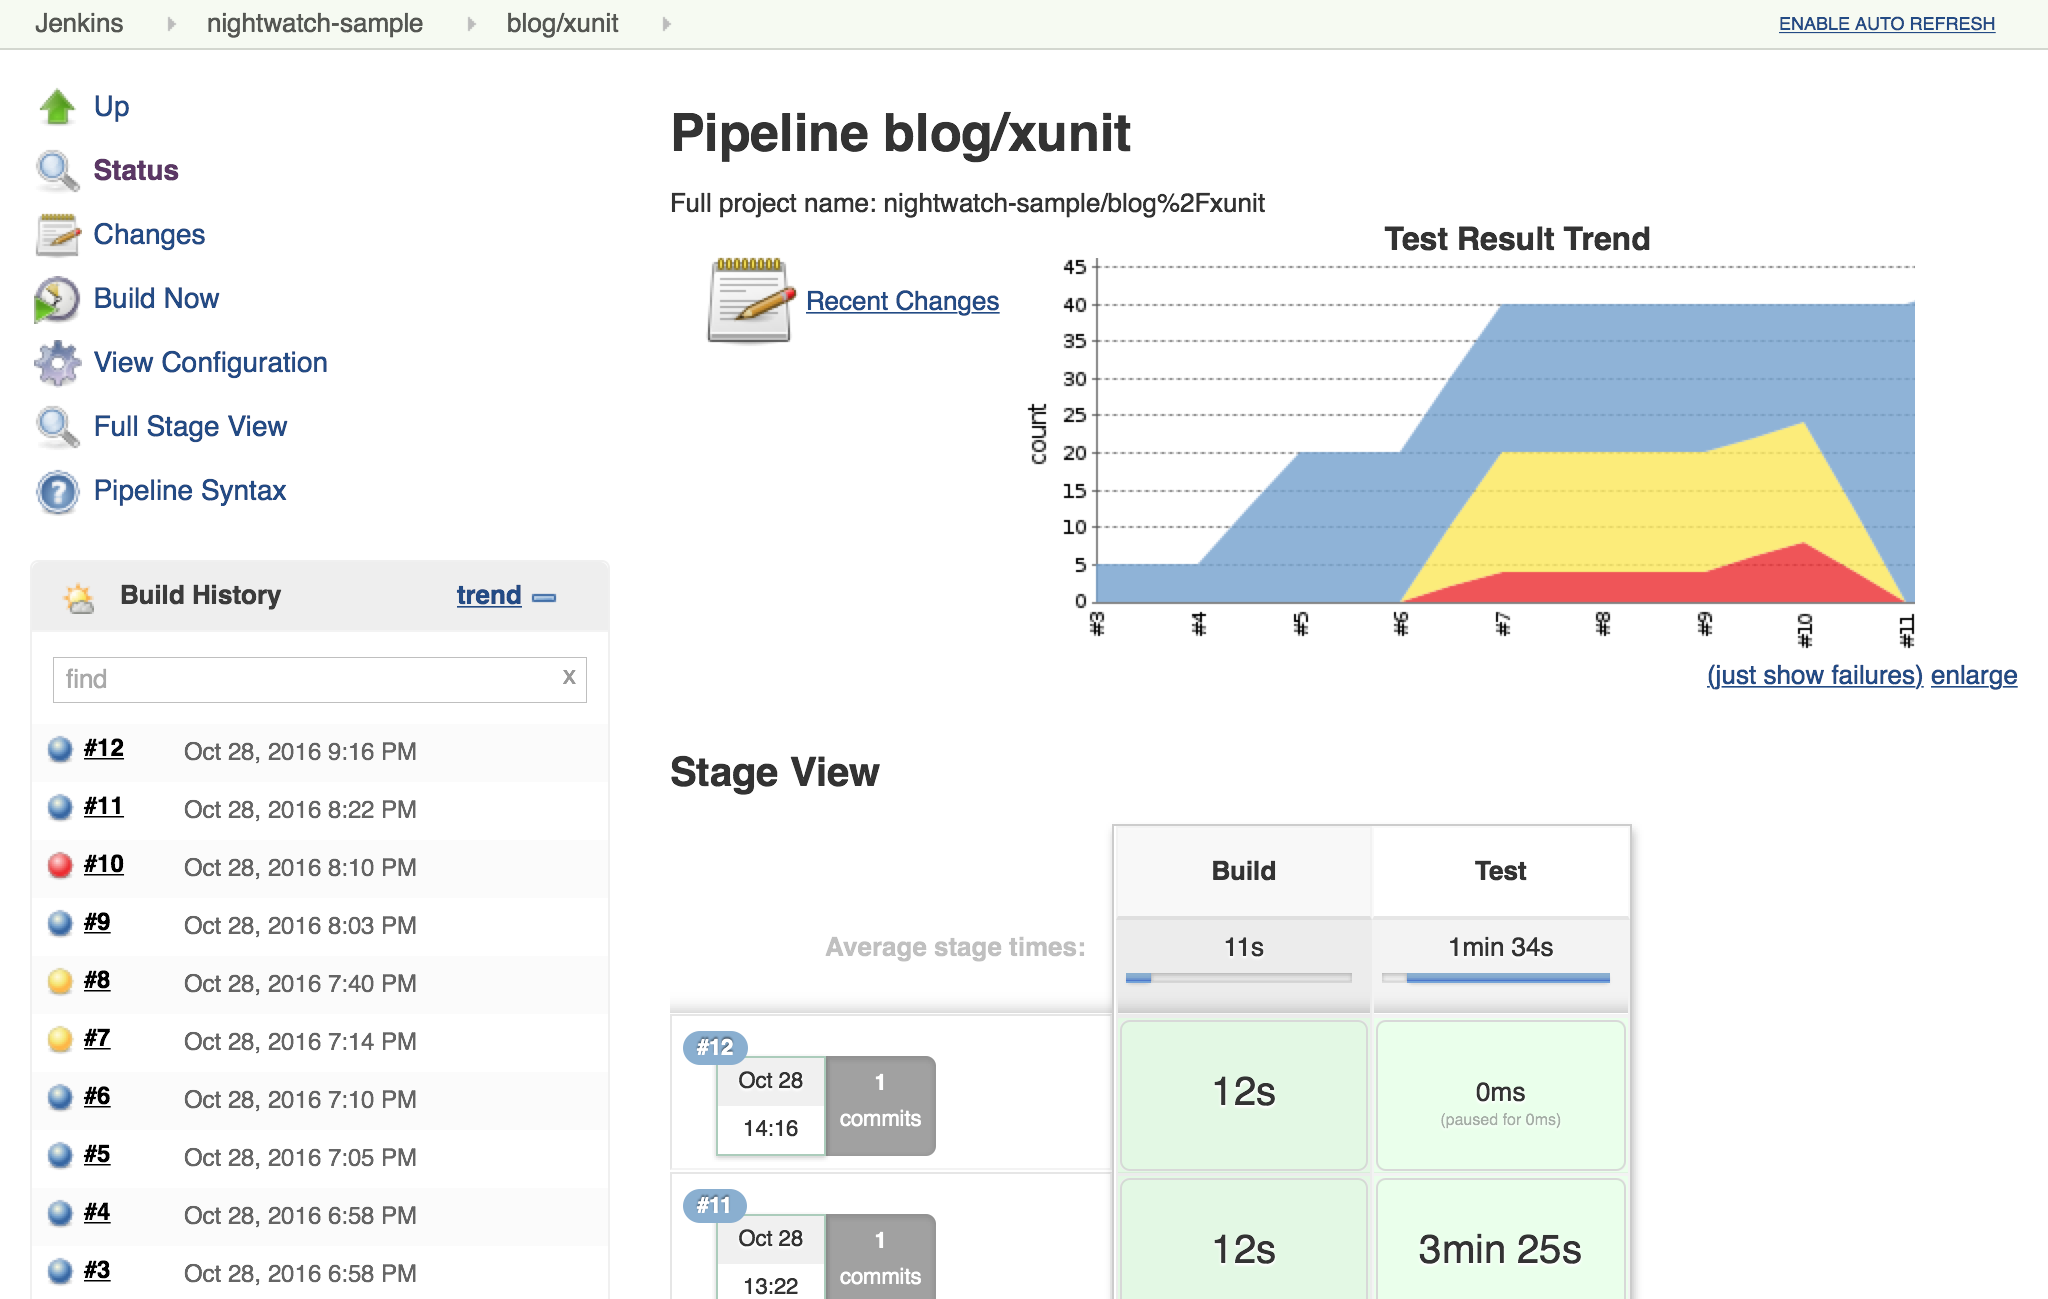 Screenshot of Jenkins job summary showing a graph of test results over time